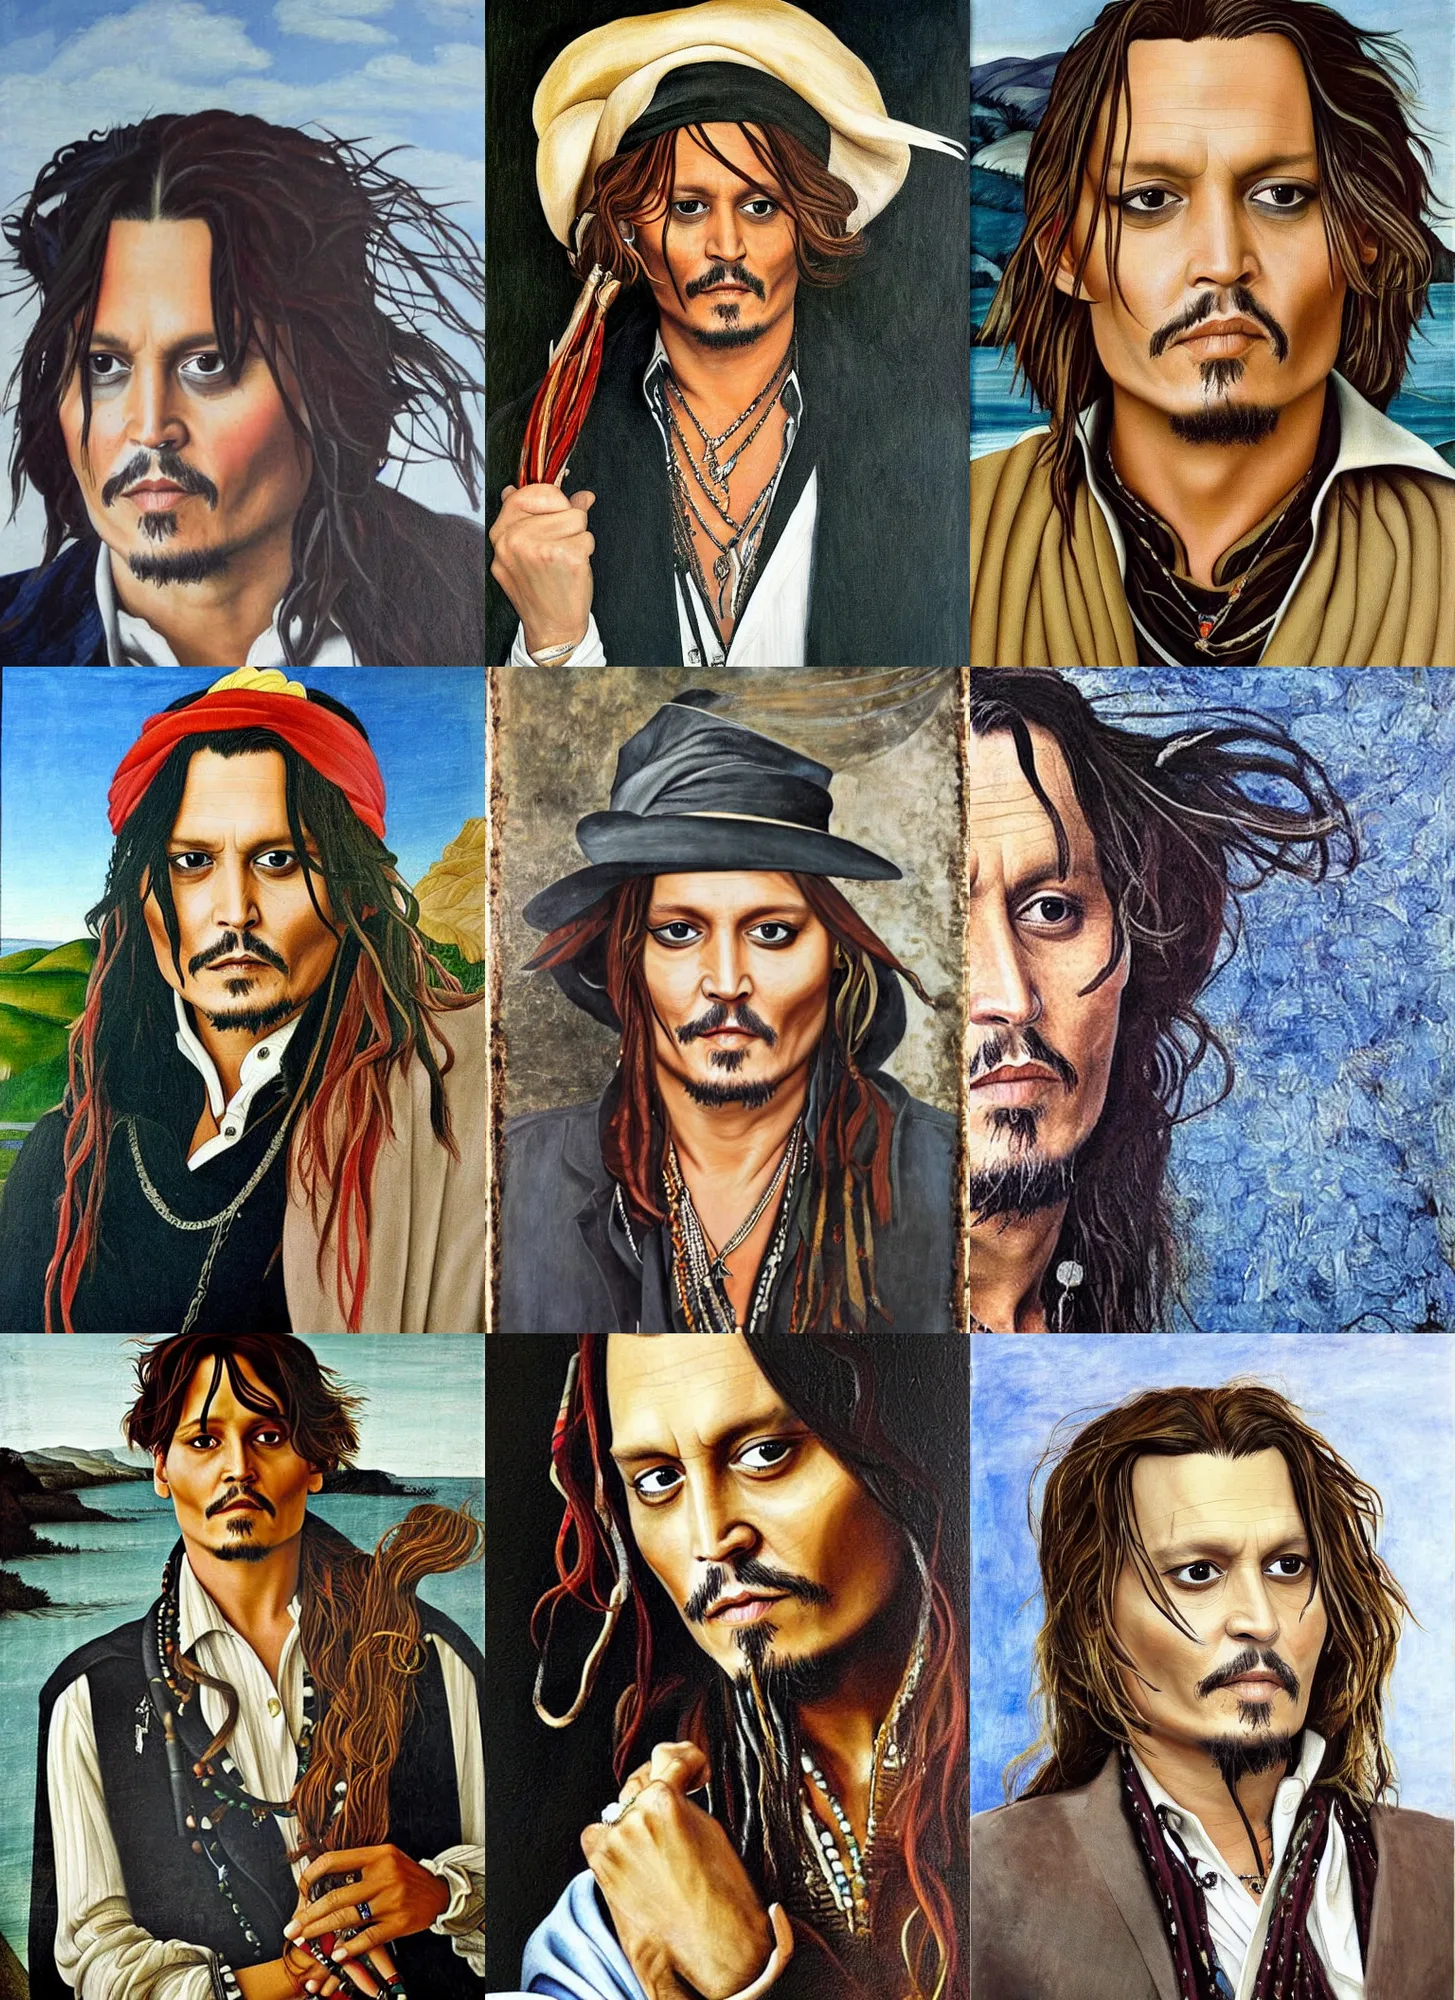 Prompt: Johnny Depp, painting by Botticelli